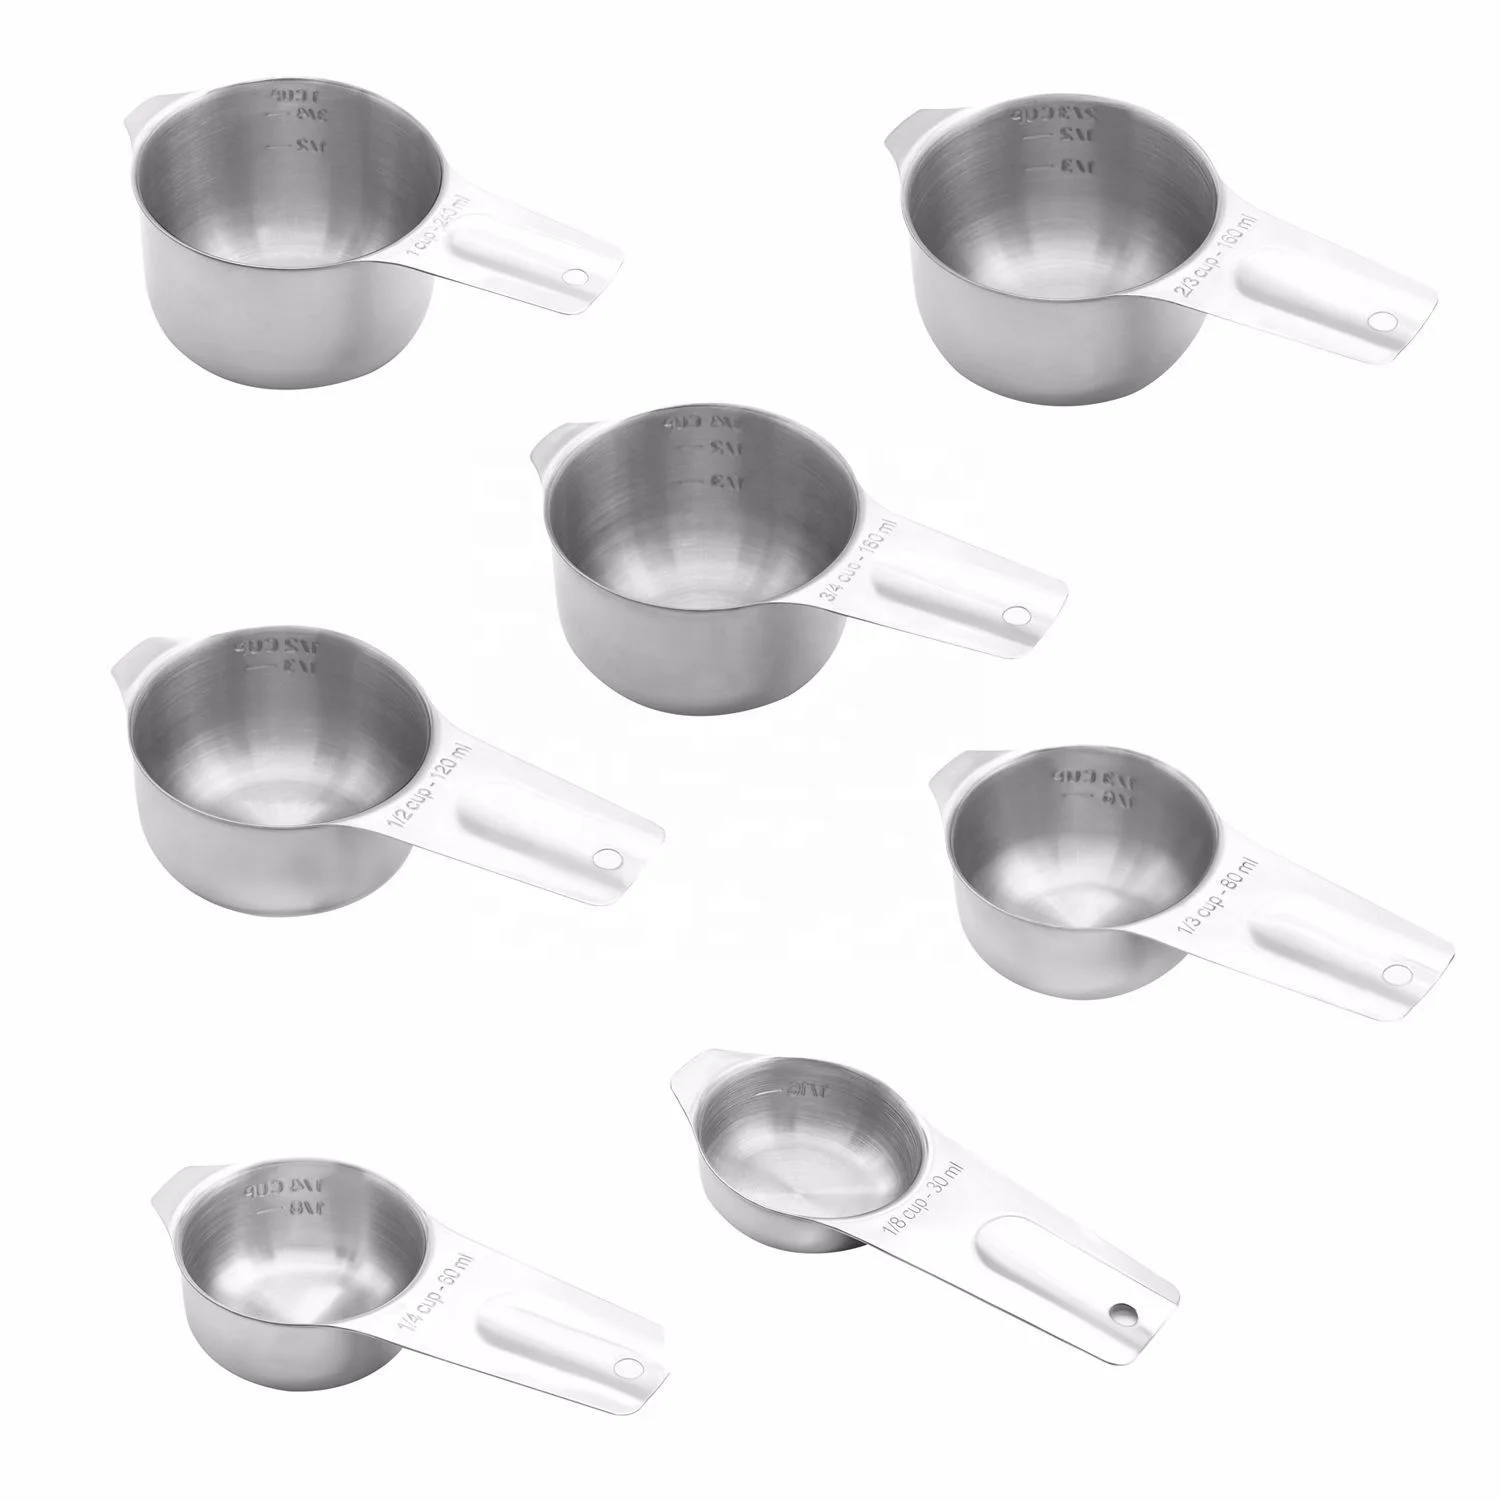 Measuring Cups 7 Piece with 1/8 Cup Coffee Scoop by Simply Gourmet. Stainless Steel Measuring Cup Set. Liquid Measuring Cup or Dry Measuring Cup.